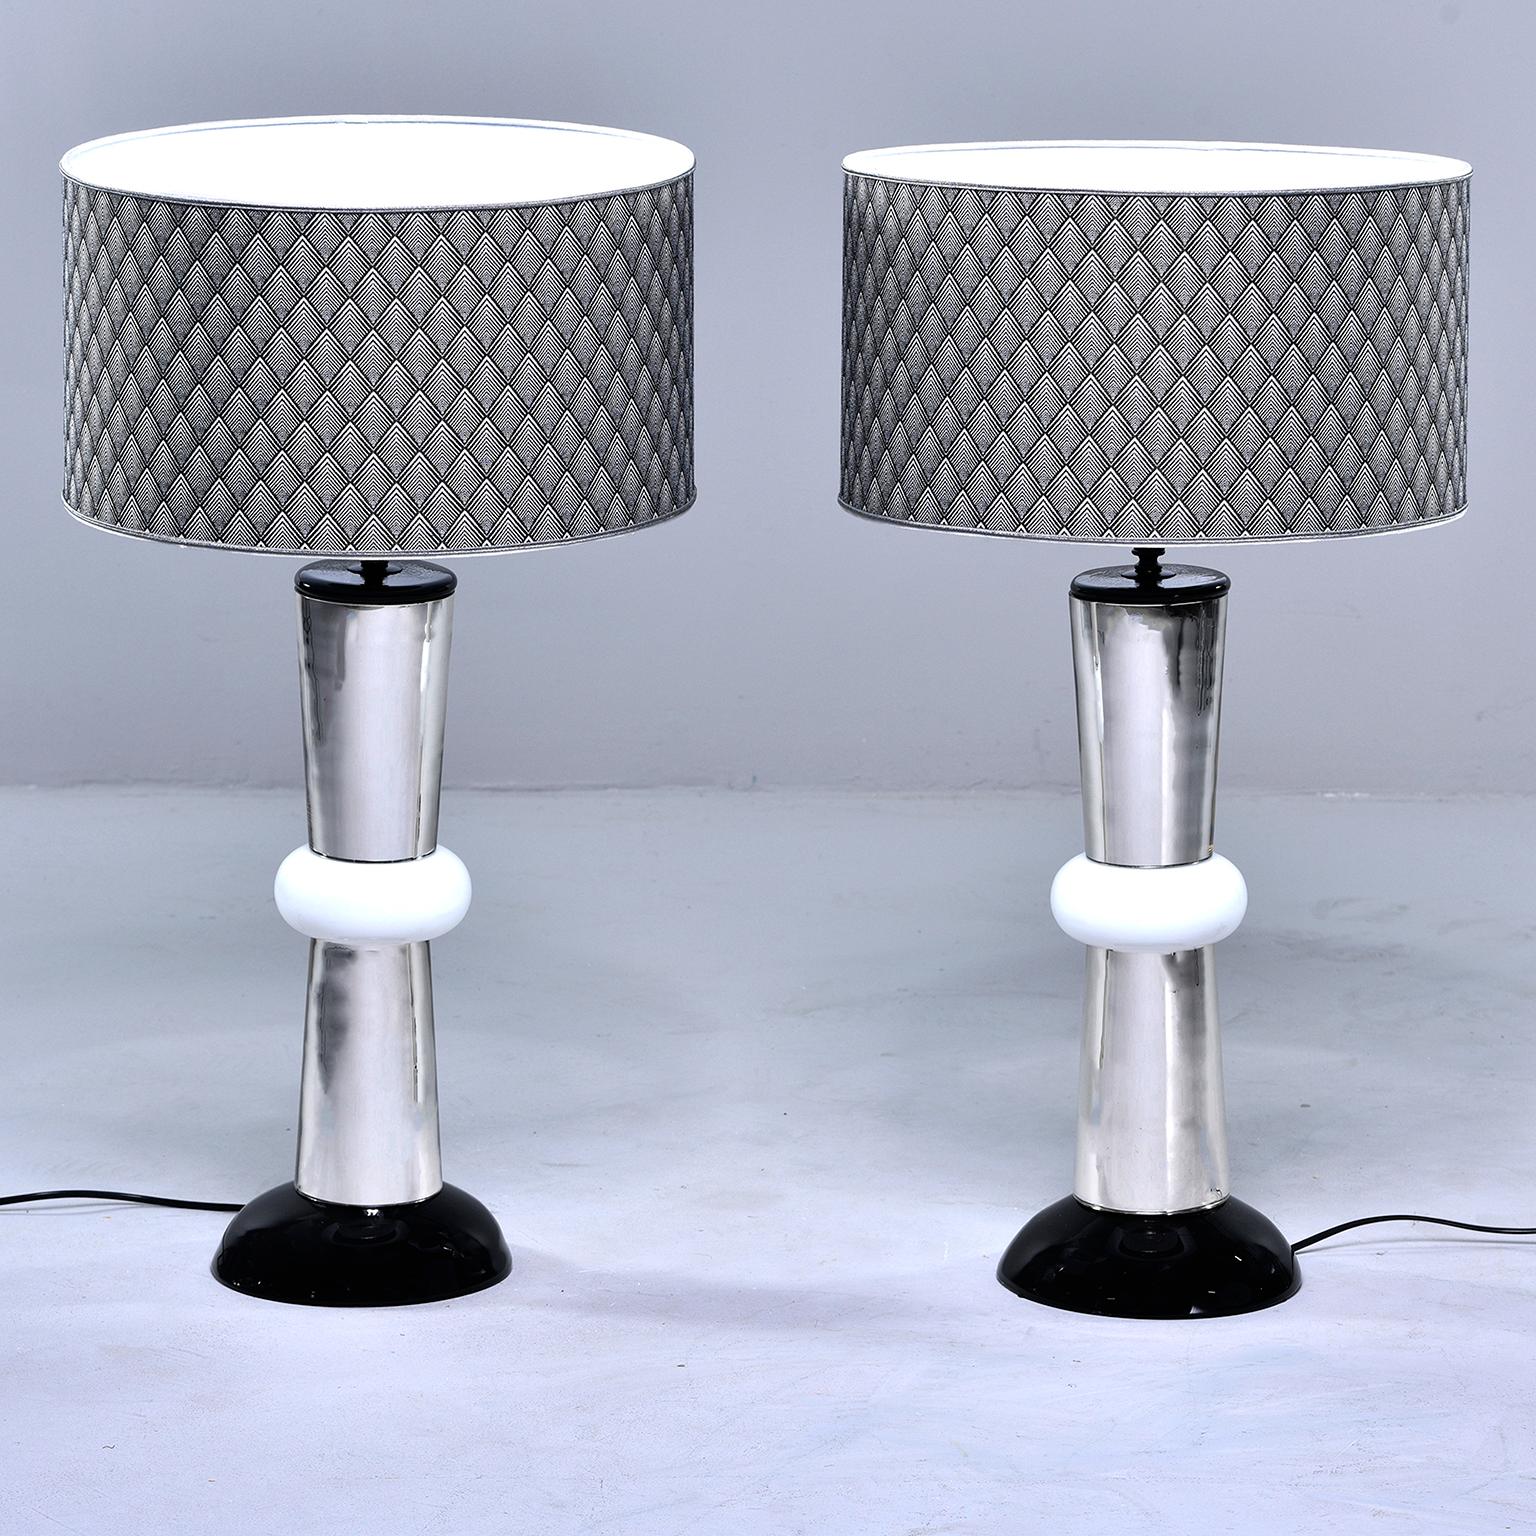 Pair of Italian Silver and White Glass Lamps with Patterned Shades For Sale 2